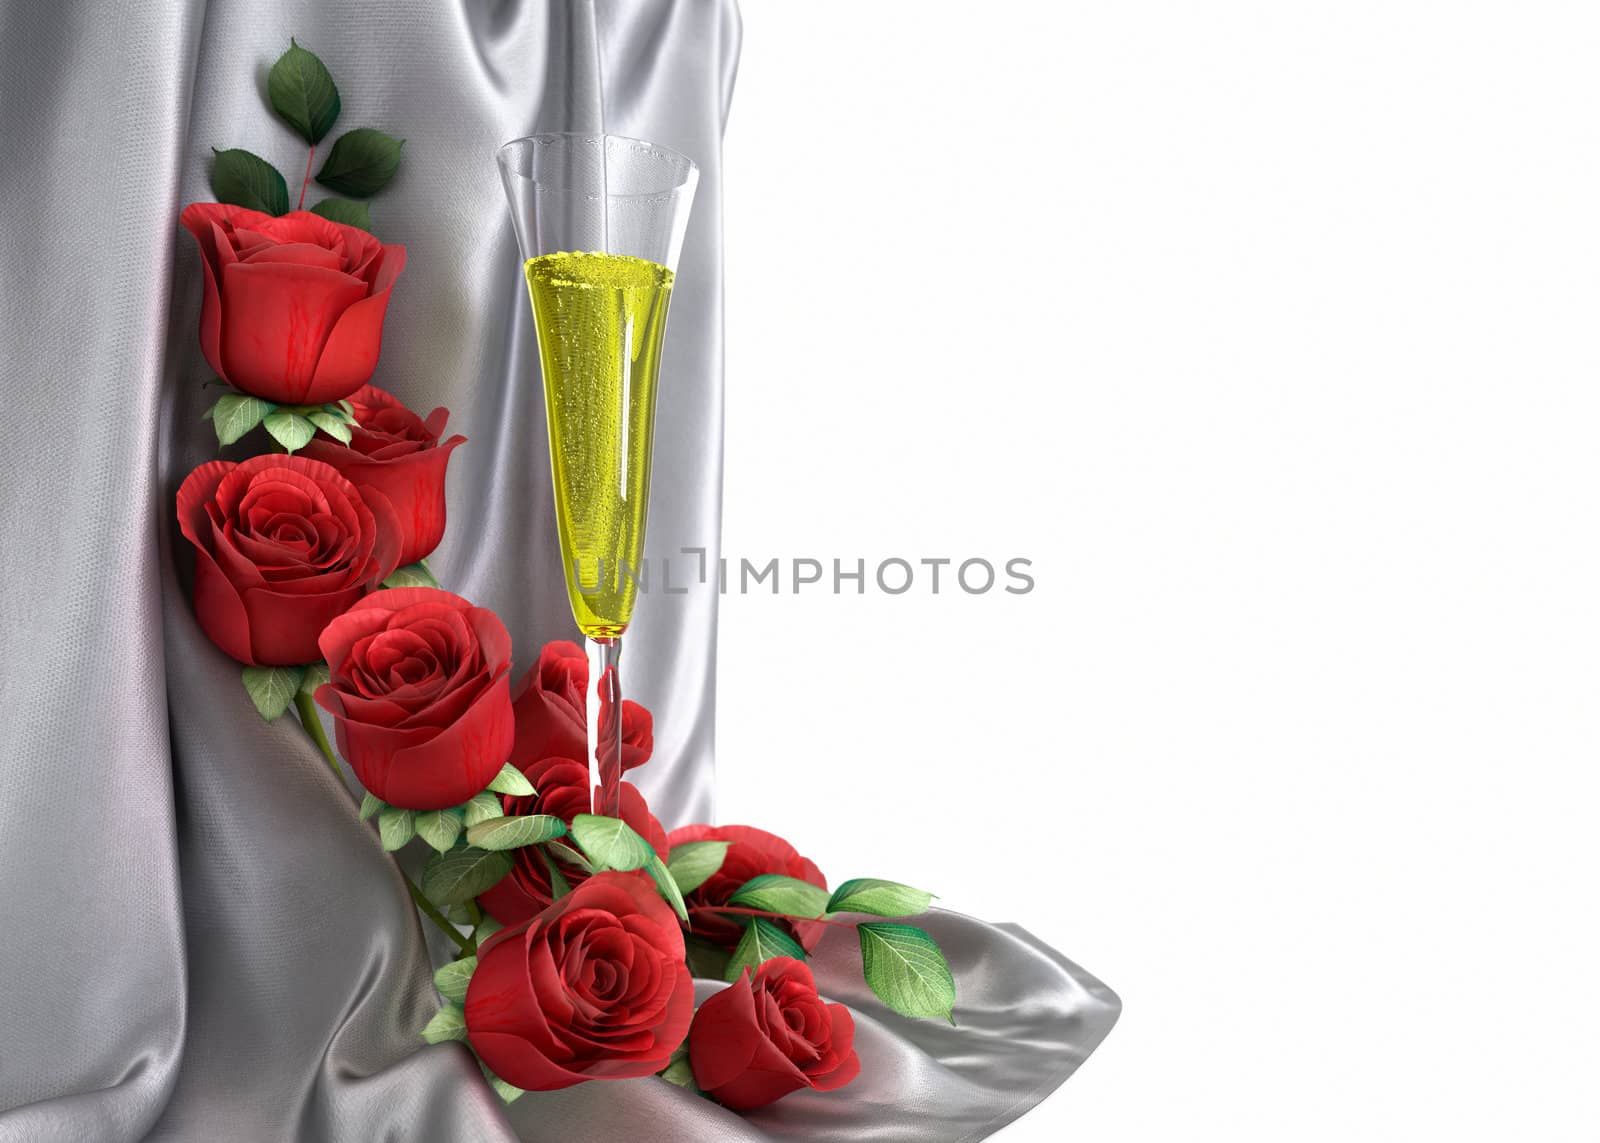 isolate holiday background with roses, glass and fabric